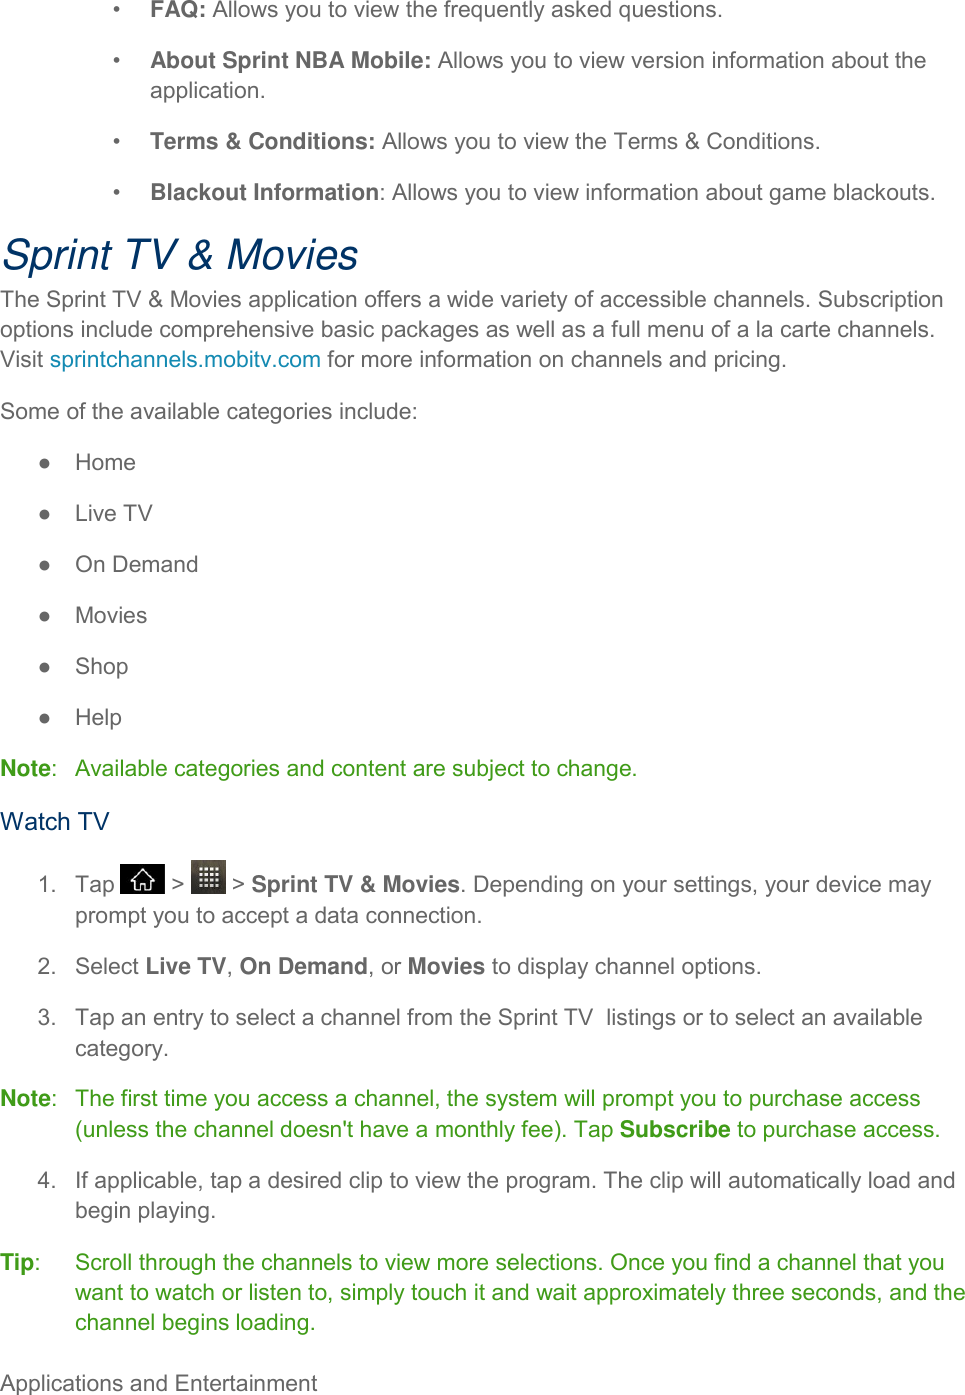 Applications and Entertainment     •  FAQ: Allows you to view the frequently asked questions. •  About Sprint NBA Mobile: Allows you to view version information about the application. •  Terms &amp; Conditions: Allows you to view the Terms &amp; Conditions. •  Blackout Information: Allows you to view information about game blackouts. Sprint TV &amp; Movies The Sprint TV &amp; Movies application offers a wide variety of accessible channels. Subscription options include comprehensive basic packages as well as a full menu of a la carte channels. Visit sprintchannels.mobitv.com for more information on channels and pricing. Some of the available categories include: ●  Home ●  Live TV ●  On Demand ●  Movies ●  Shop ●  Help Note:   Available categories and content are subject to change. Watch TV 1.  Tap   &gt;   &gt; Sprint TV &amp; Movies. Depending on your settings, your device may prompt you to accept a data connection. 2.  Select Live TV, On Demand, or Movies to display channel options. 3.  Tap an entry to select a channel from the Sprint TV  listings or to select an available category. Note:   The first time you access a channel, the system will prompt you to purchase access (unless the channel doesn&apos;t have a monthly fee). Tap Subscribe to purchase access. 4.  If applicable, tap a desired clip to view the program. The clip will automatically load and begin playing. Tip:   Scroll through the channels to view more selections. Once you find a channel that you want to watch or listen to, simply touch it and wait approximately three seconds, and the channel begins loading. 